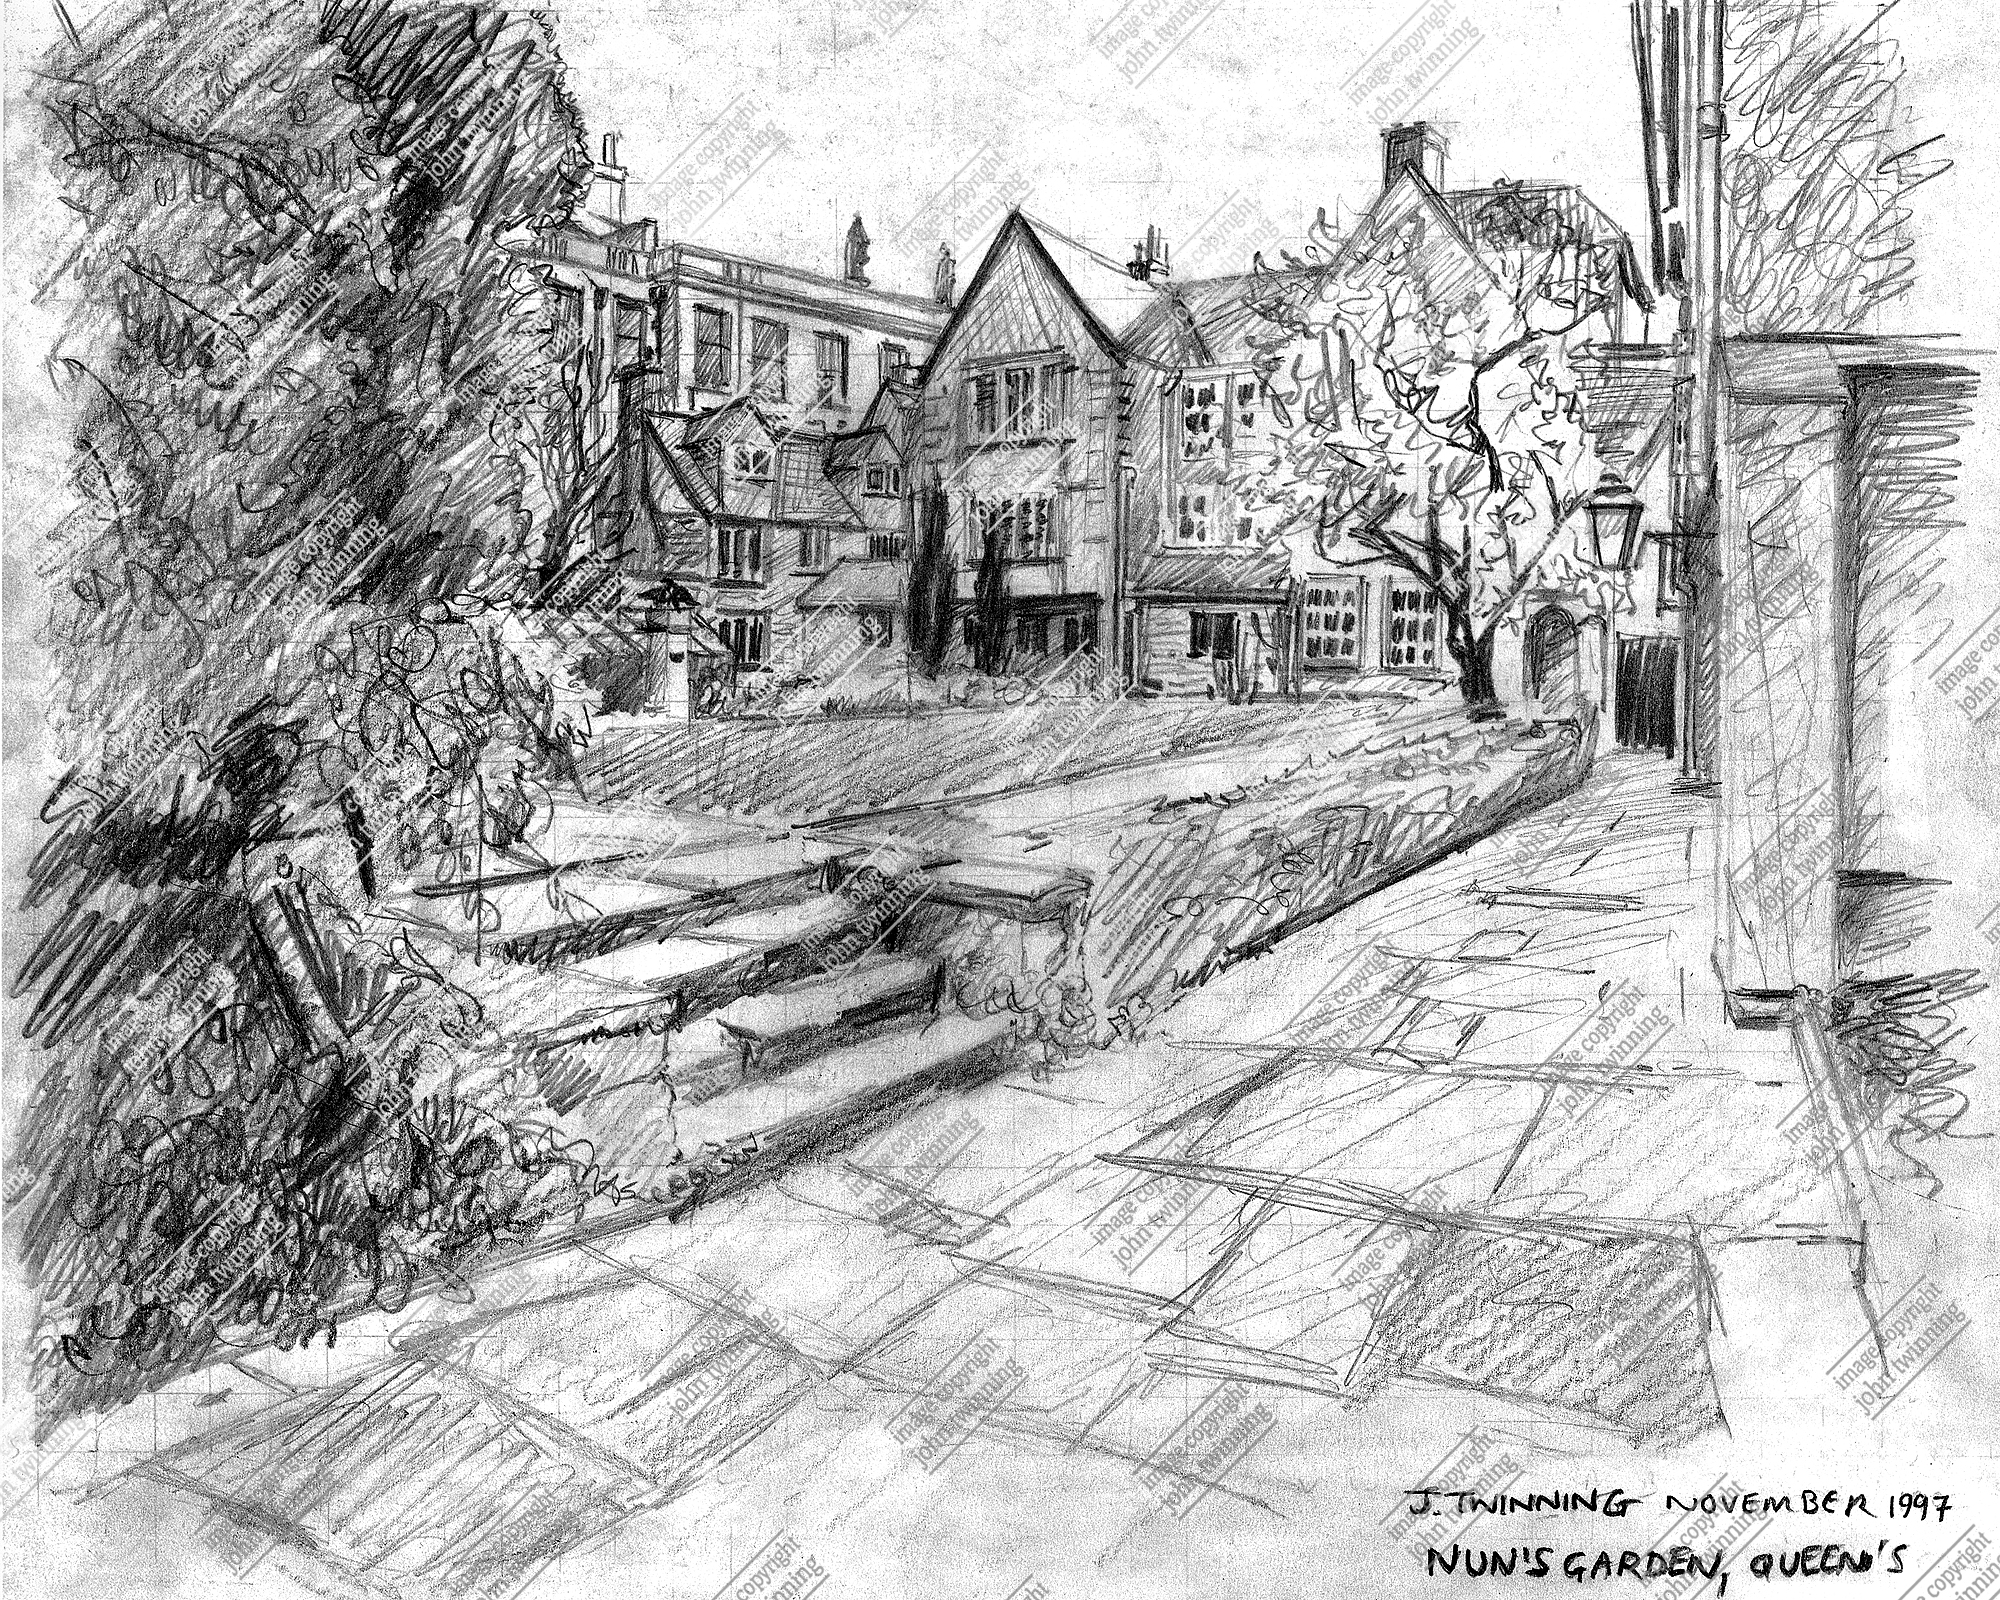 ‘The Nun’s Garden’ [landscape] – art print from a pencil drawing of this view of the queen’s college, oxford